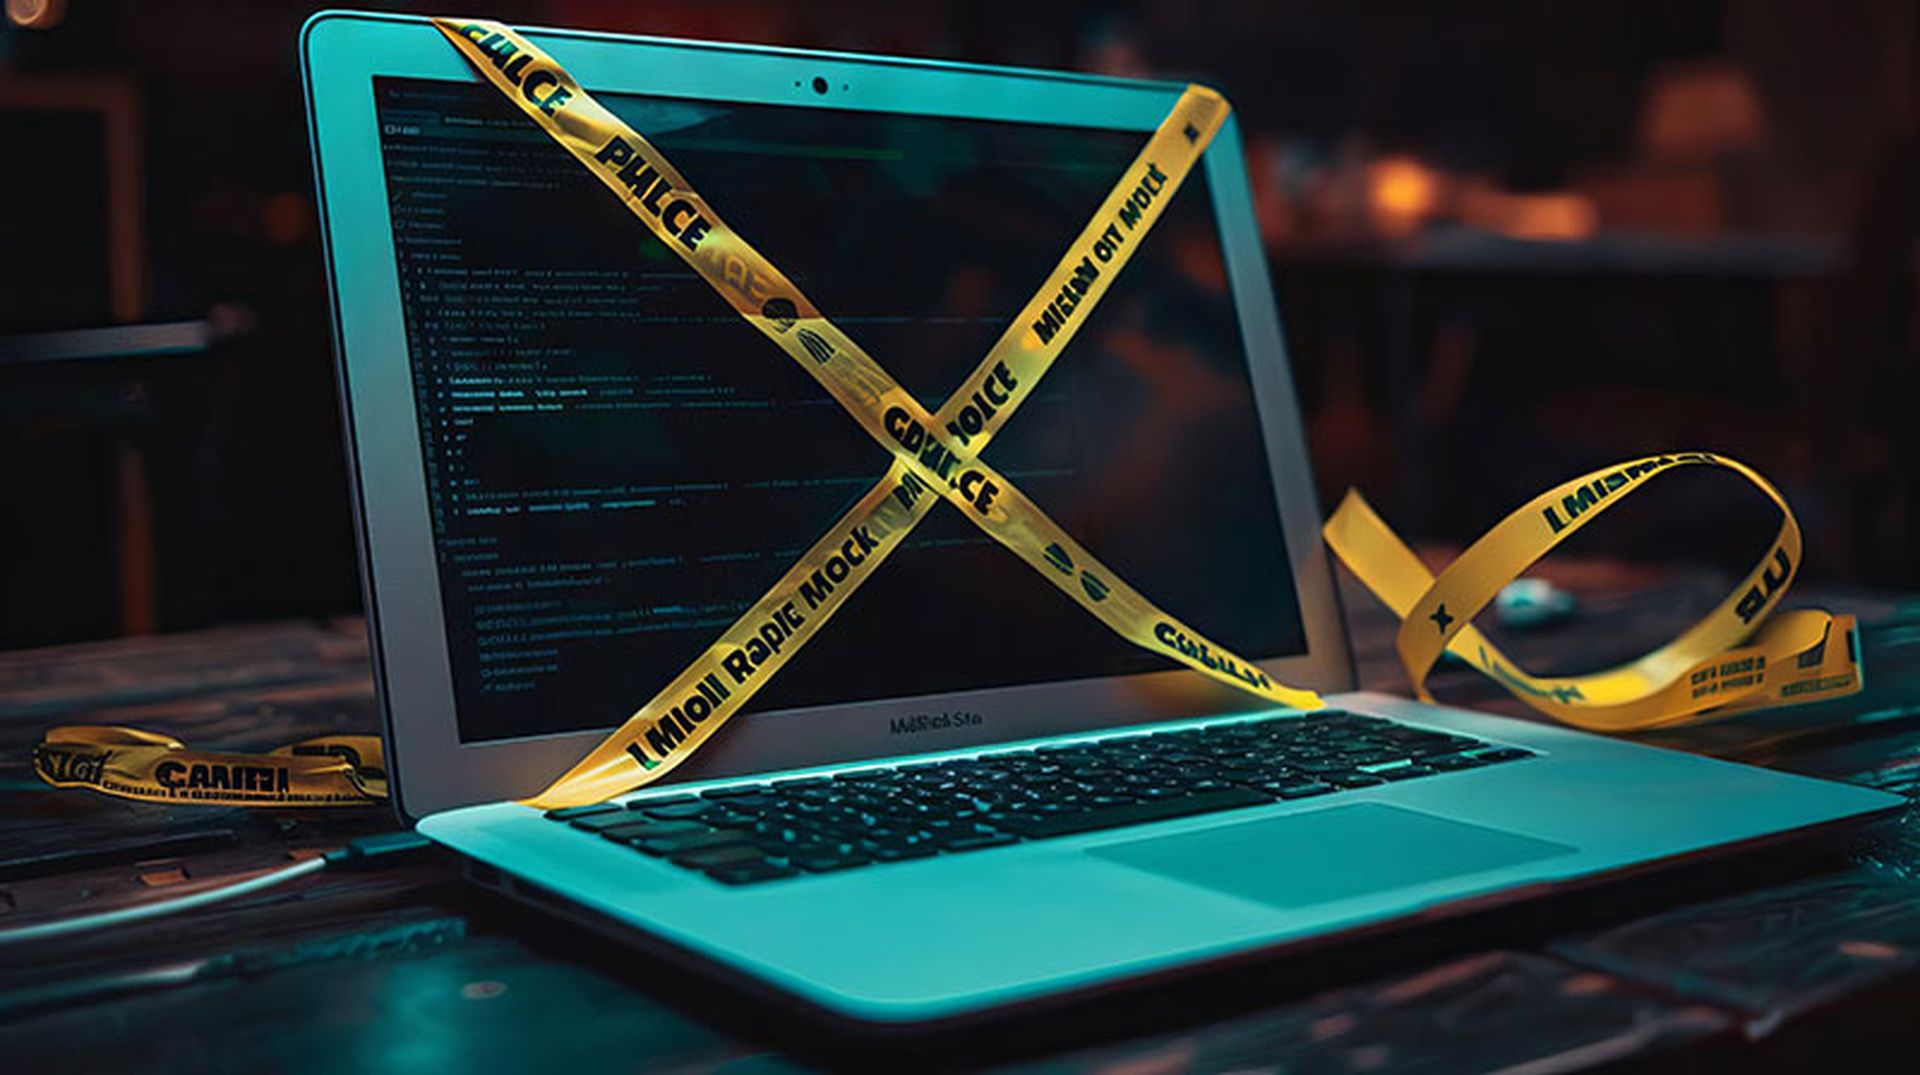 A stark image of a locked down laptop with police tape across it, symbolizing the quarantine of a system following a severe malware attack